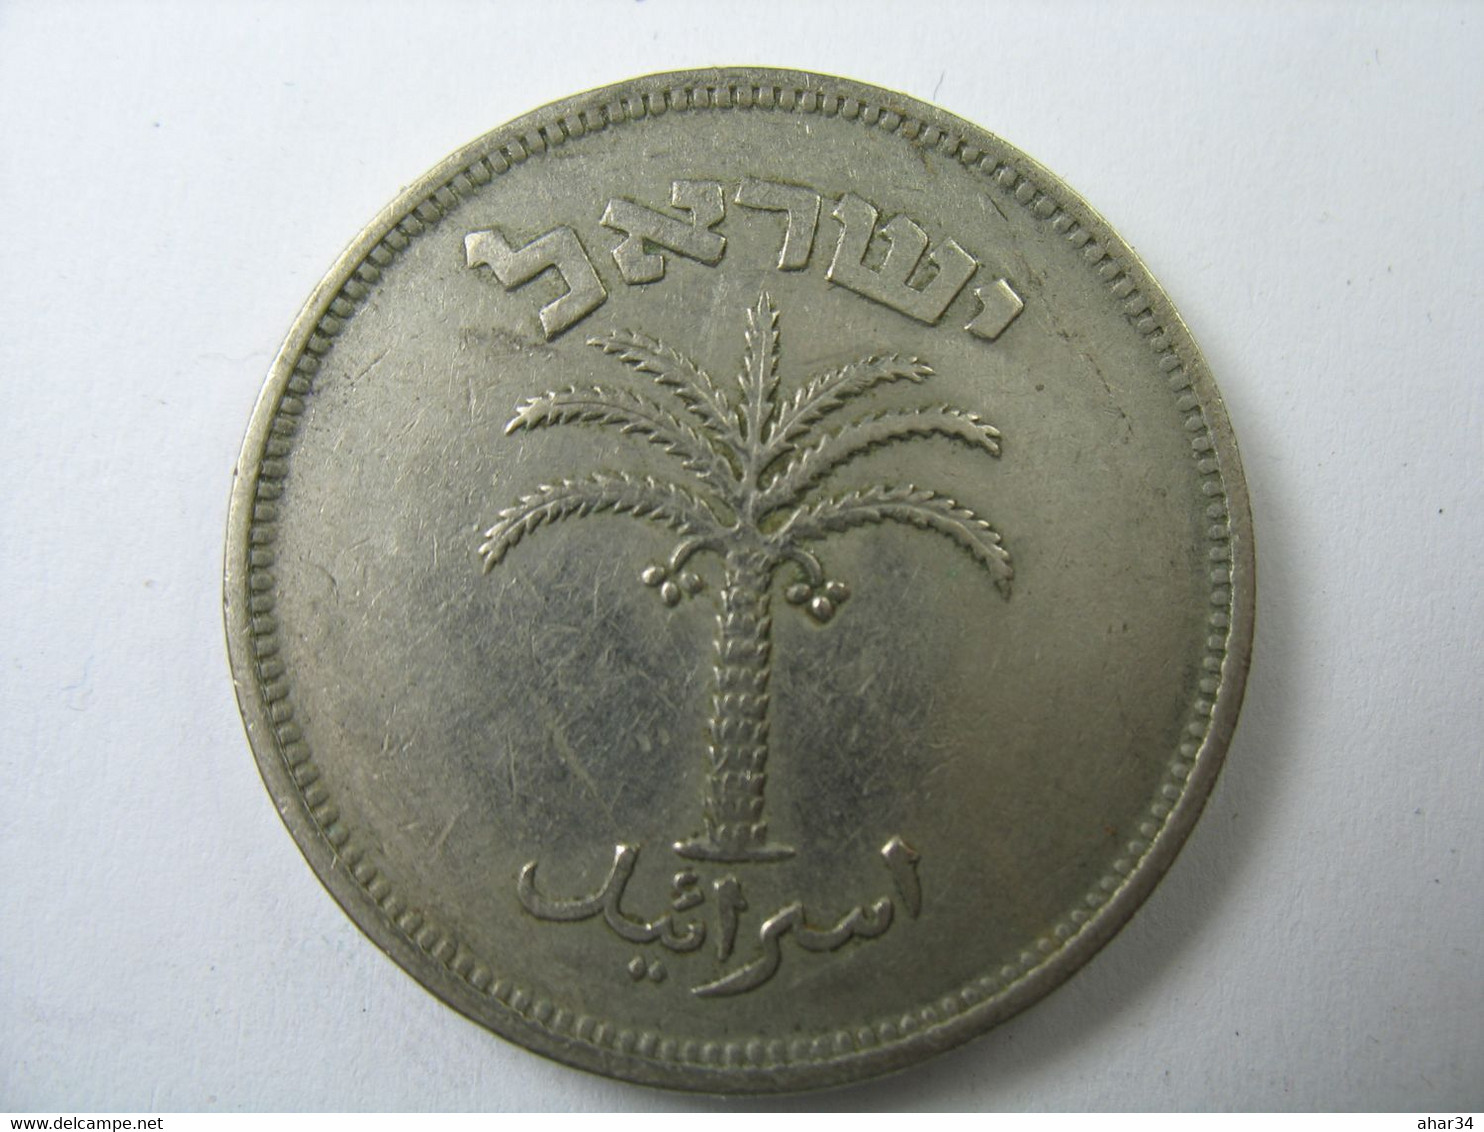 TEMPLATE LISTING ISRAEL  LOT OF  50  COINS 100 PRUTA PRUTOT 1949  COIN FREE SHIPPING  BY SURFACE REGISTERED MAIL. . - Autres – Asie